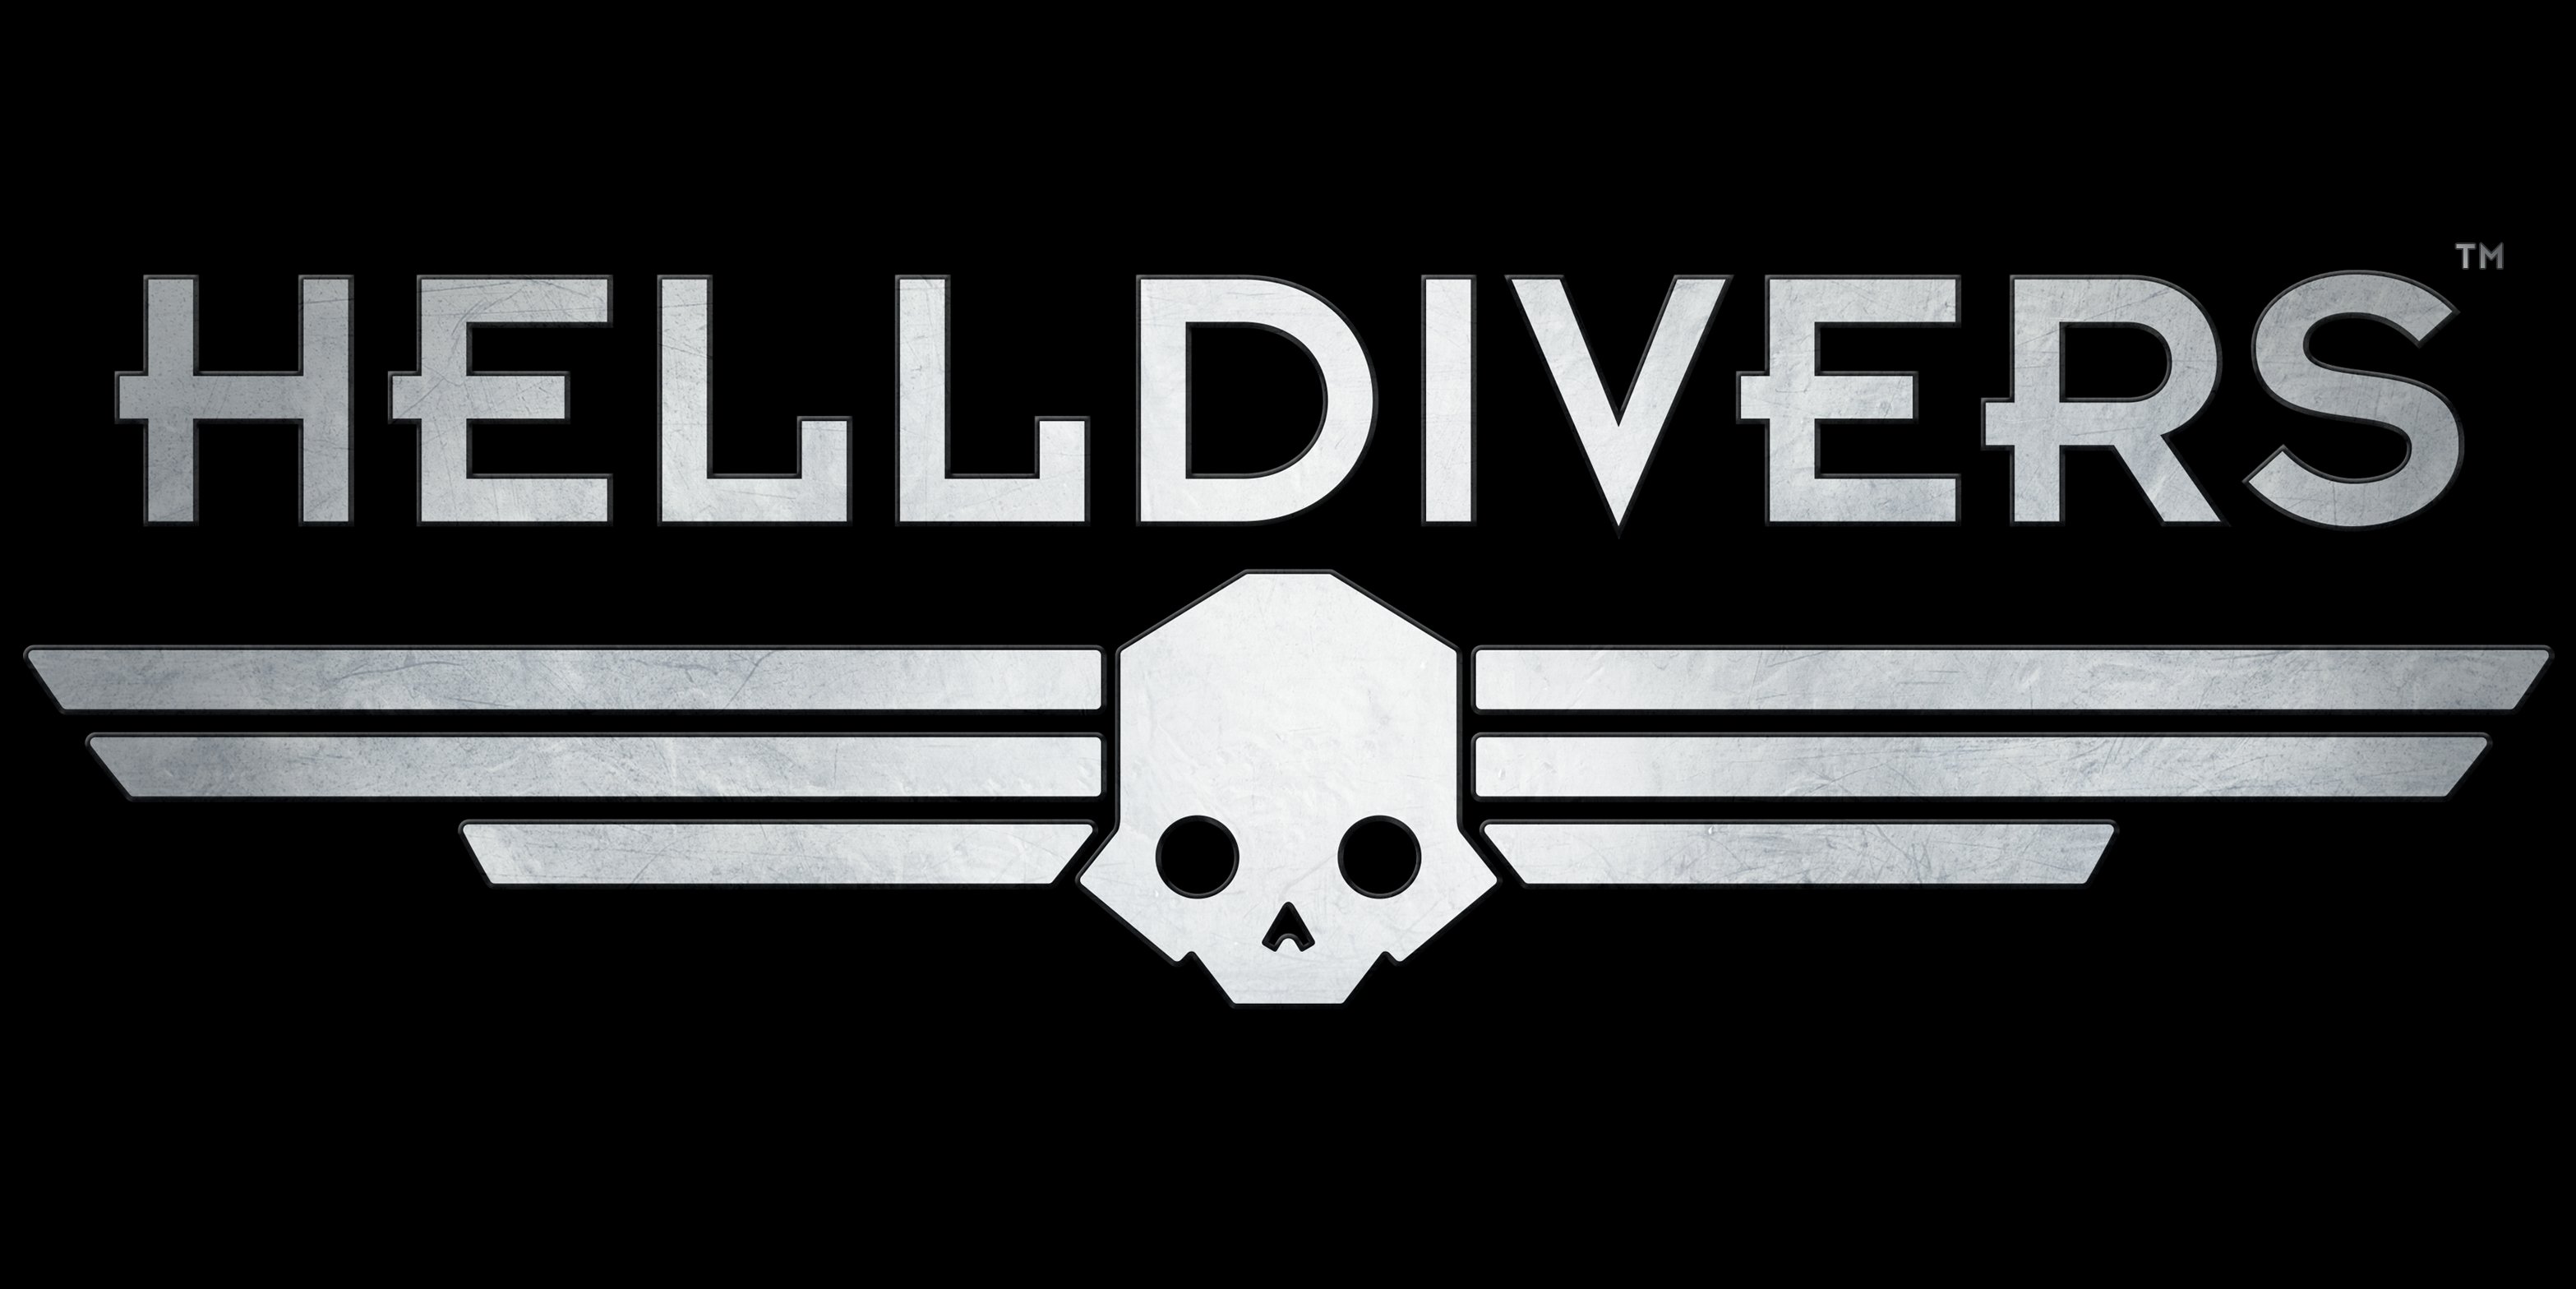 helldivers, Shooter, Sci fi, Action, Futuristic, Fighting, Tactical, 1hdrivers Wallpaper